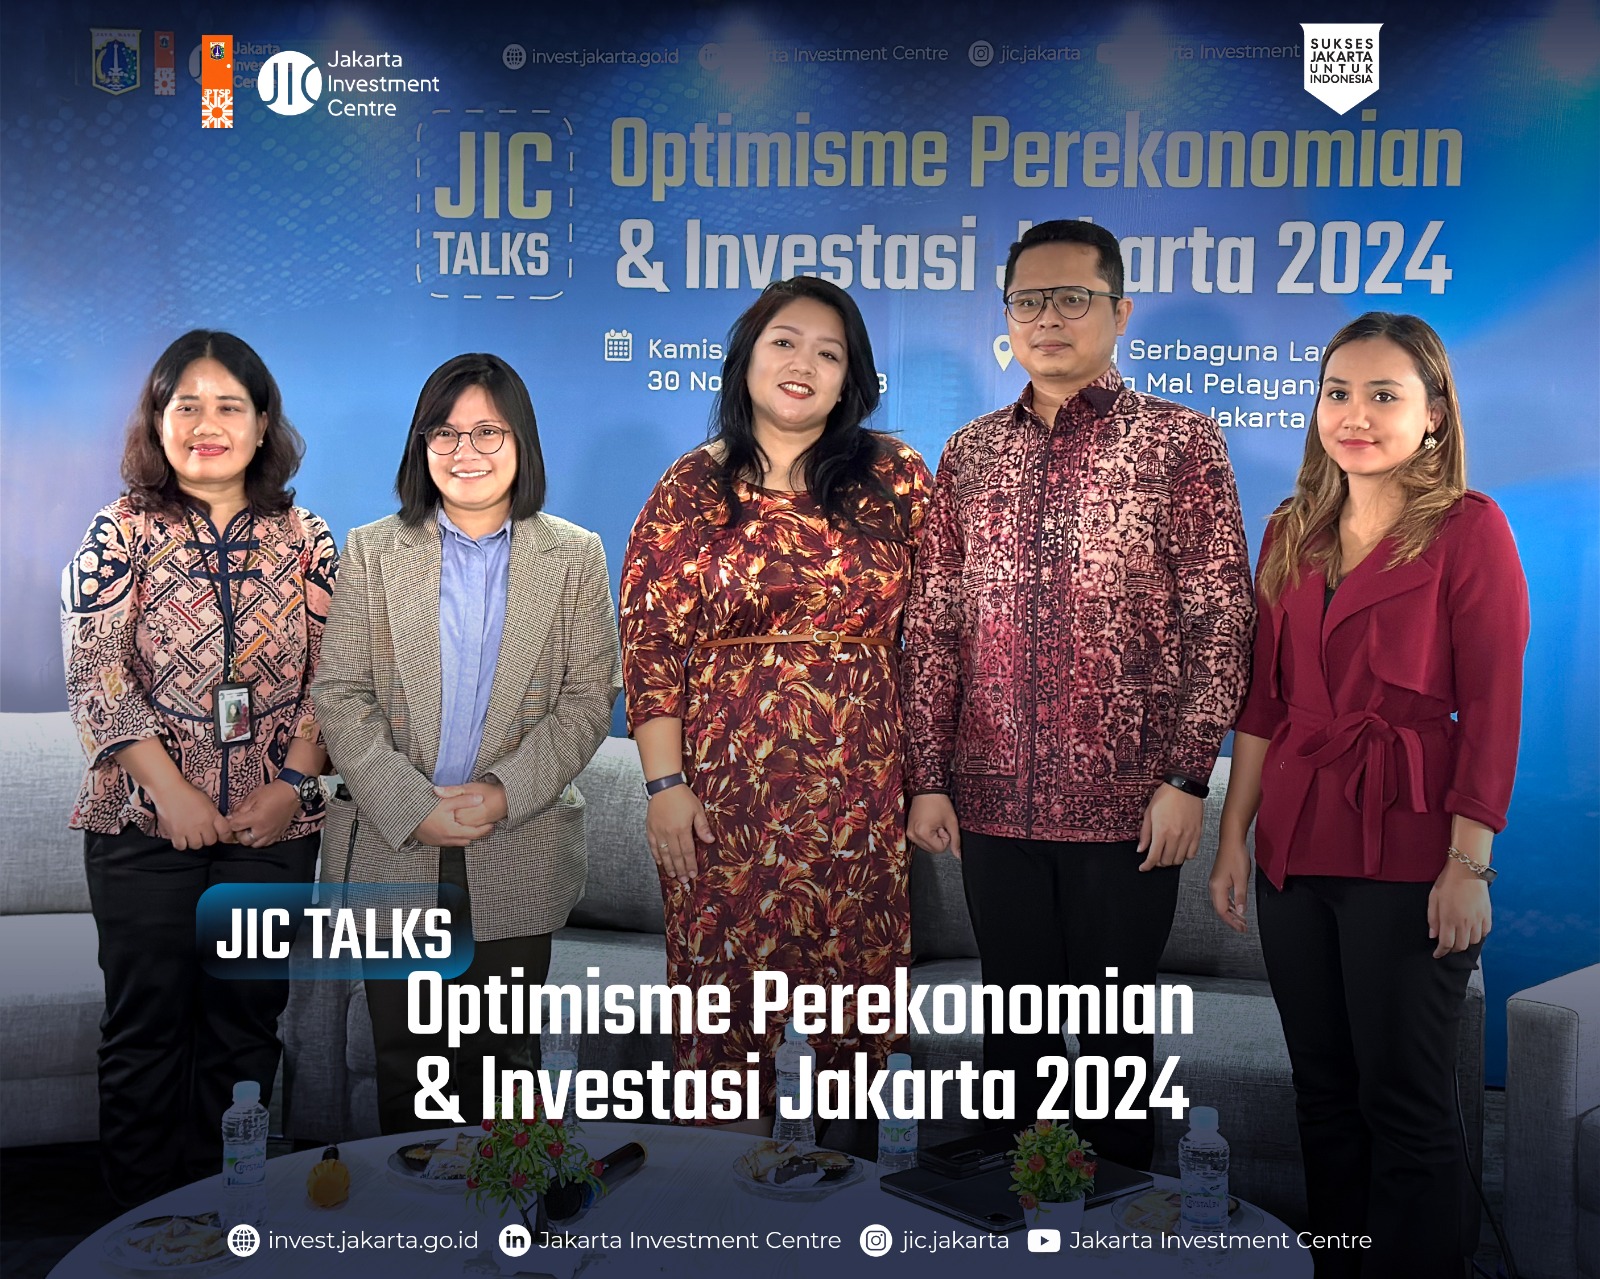 JIC Talks: Optimism for Jakarta's Economy and Investment in 2024